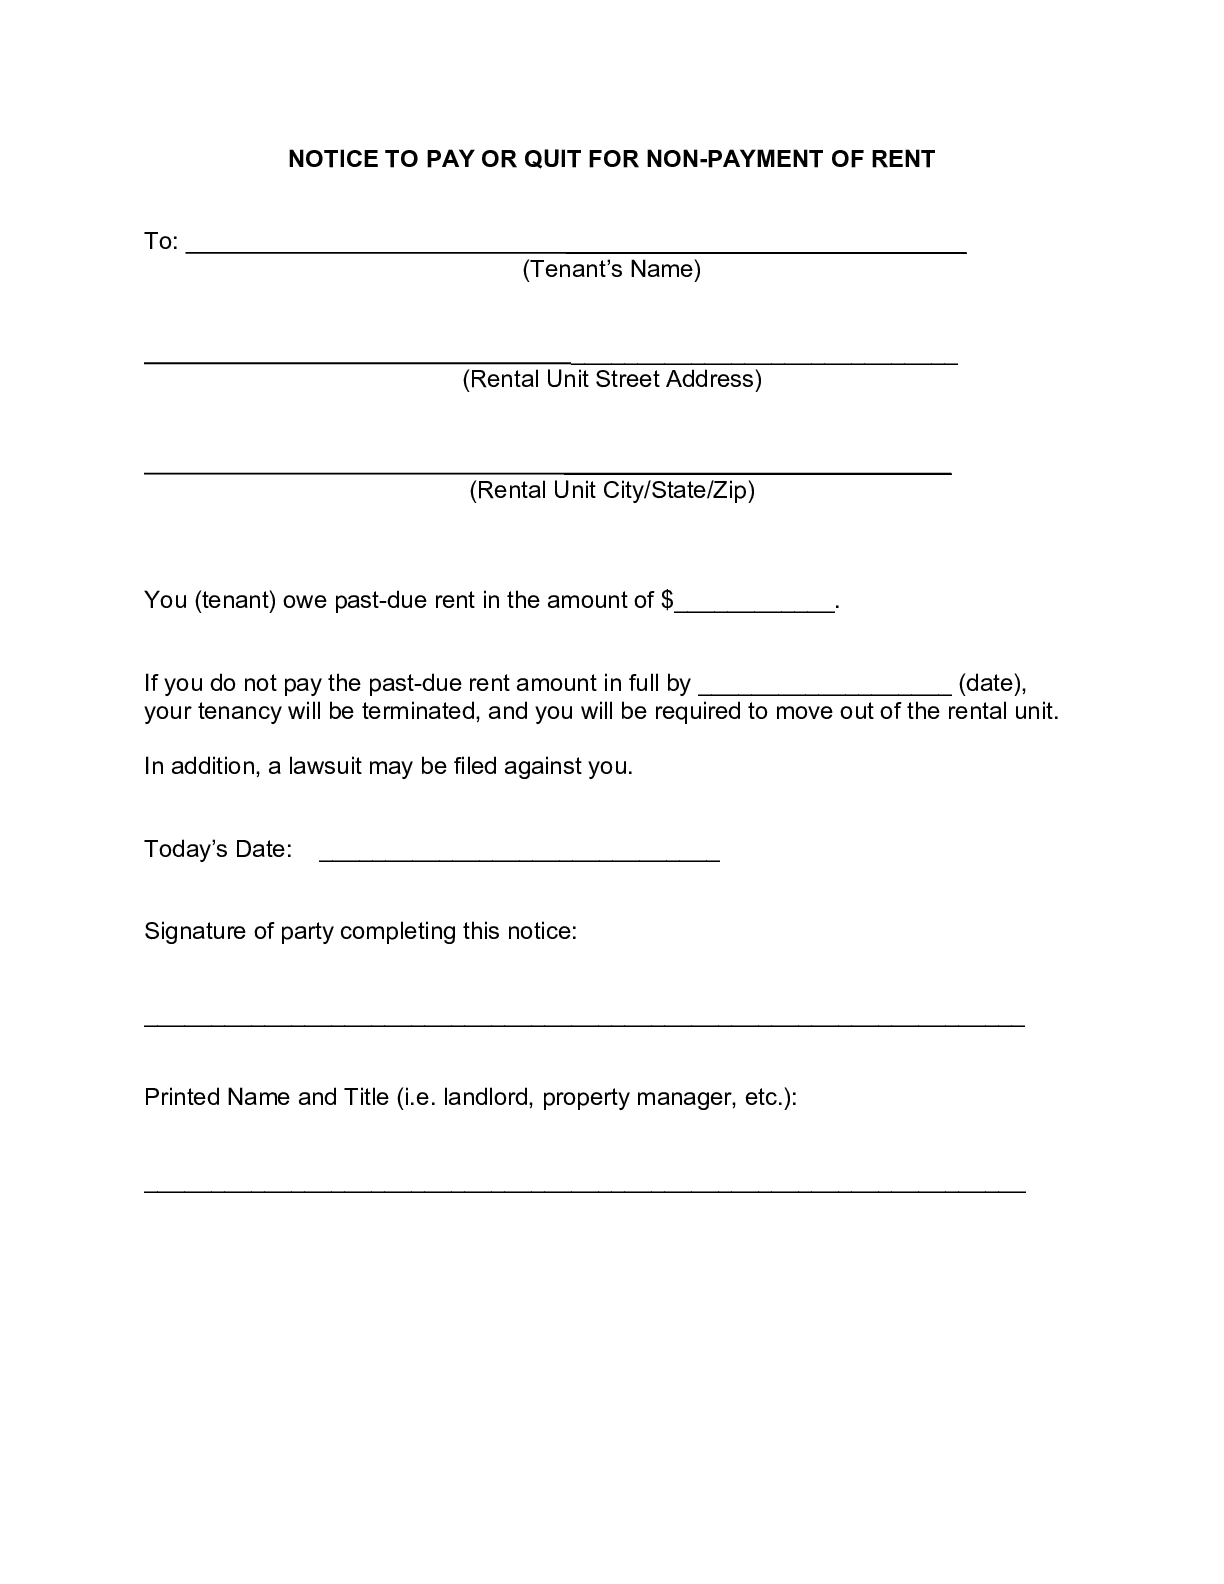 FREE Tennessee Eviction Notice Form [26]: ALL Legal Reasons